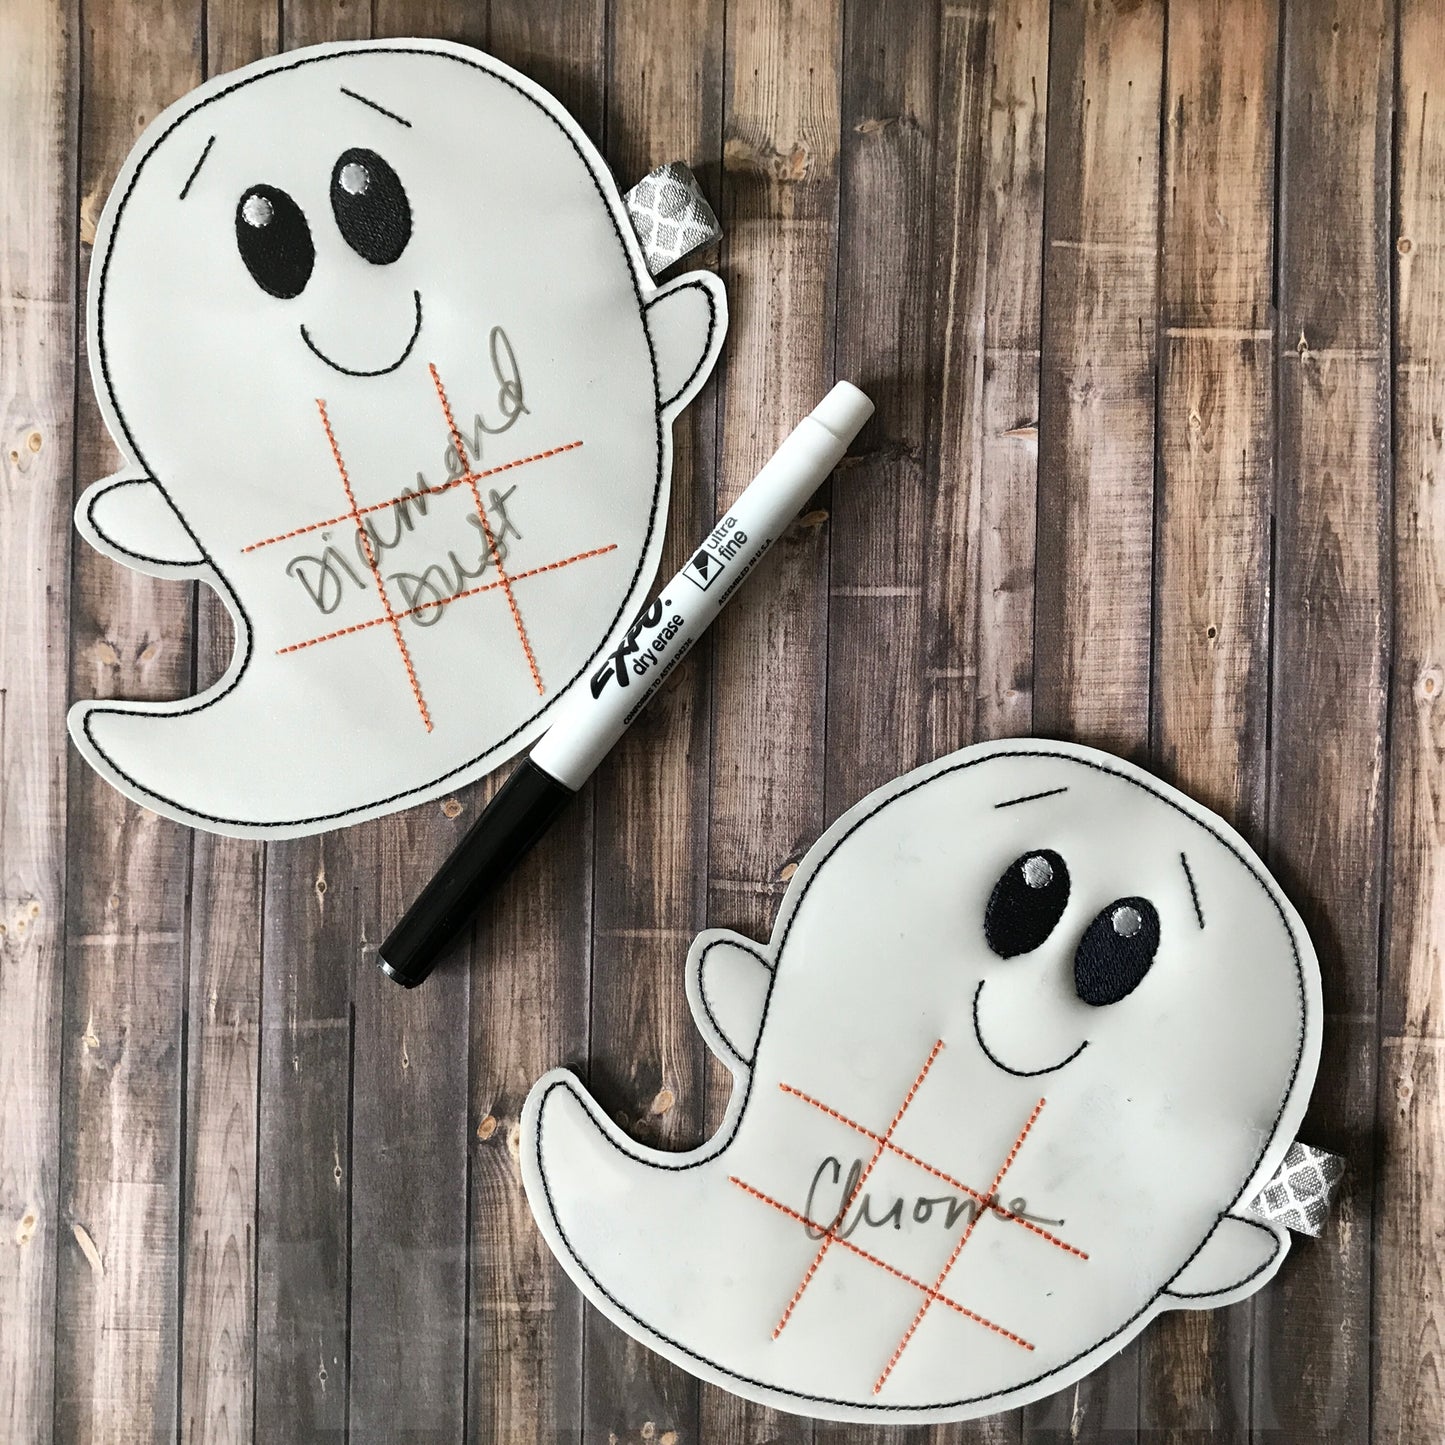 Ghost Tic Tac Toe Boards - 4 sizes - Digital Embroidery Design